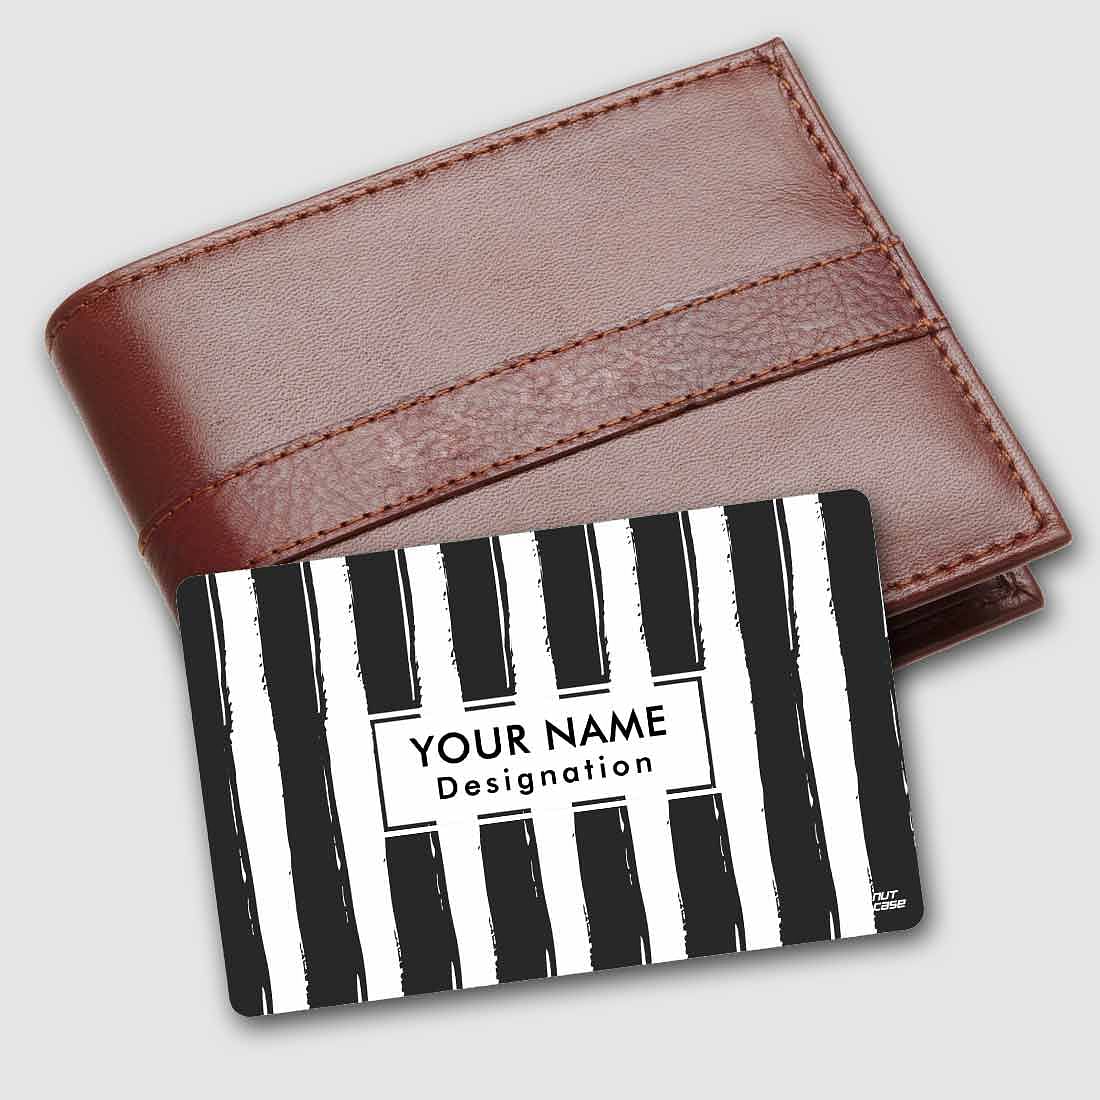 Personalized NFC Smart Card -  Black & White Lines Nutcase